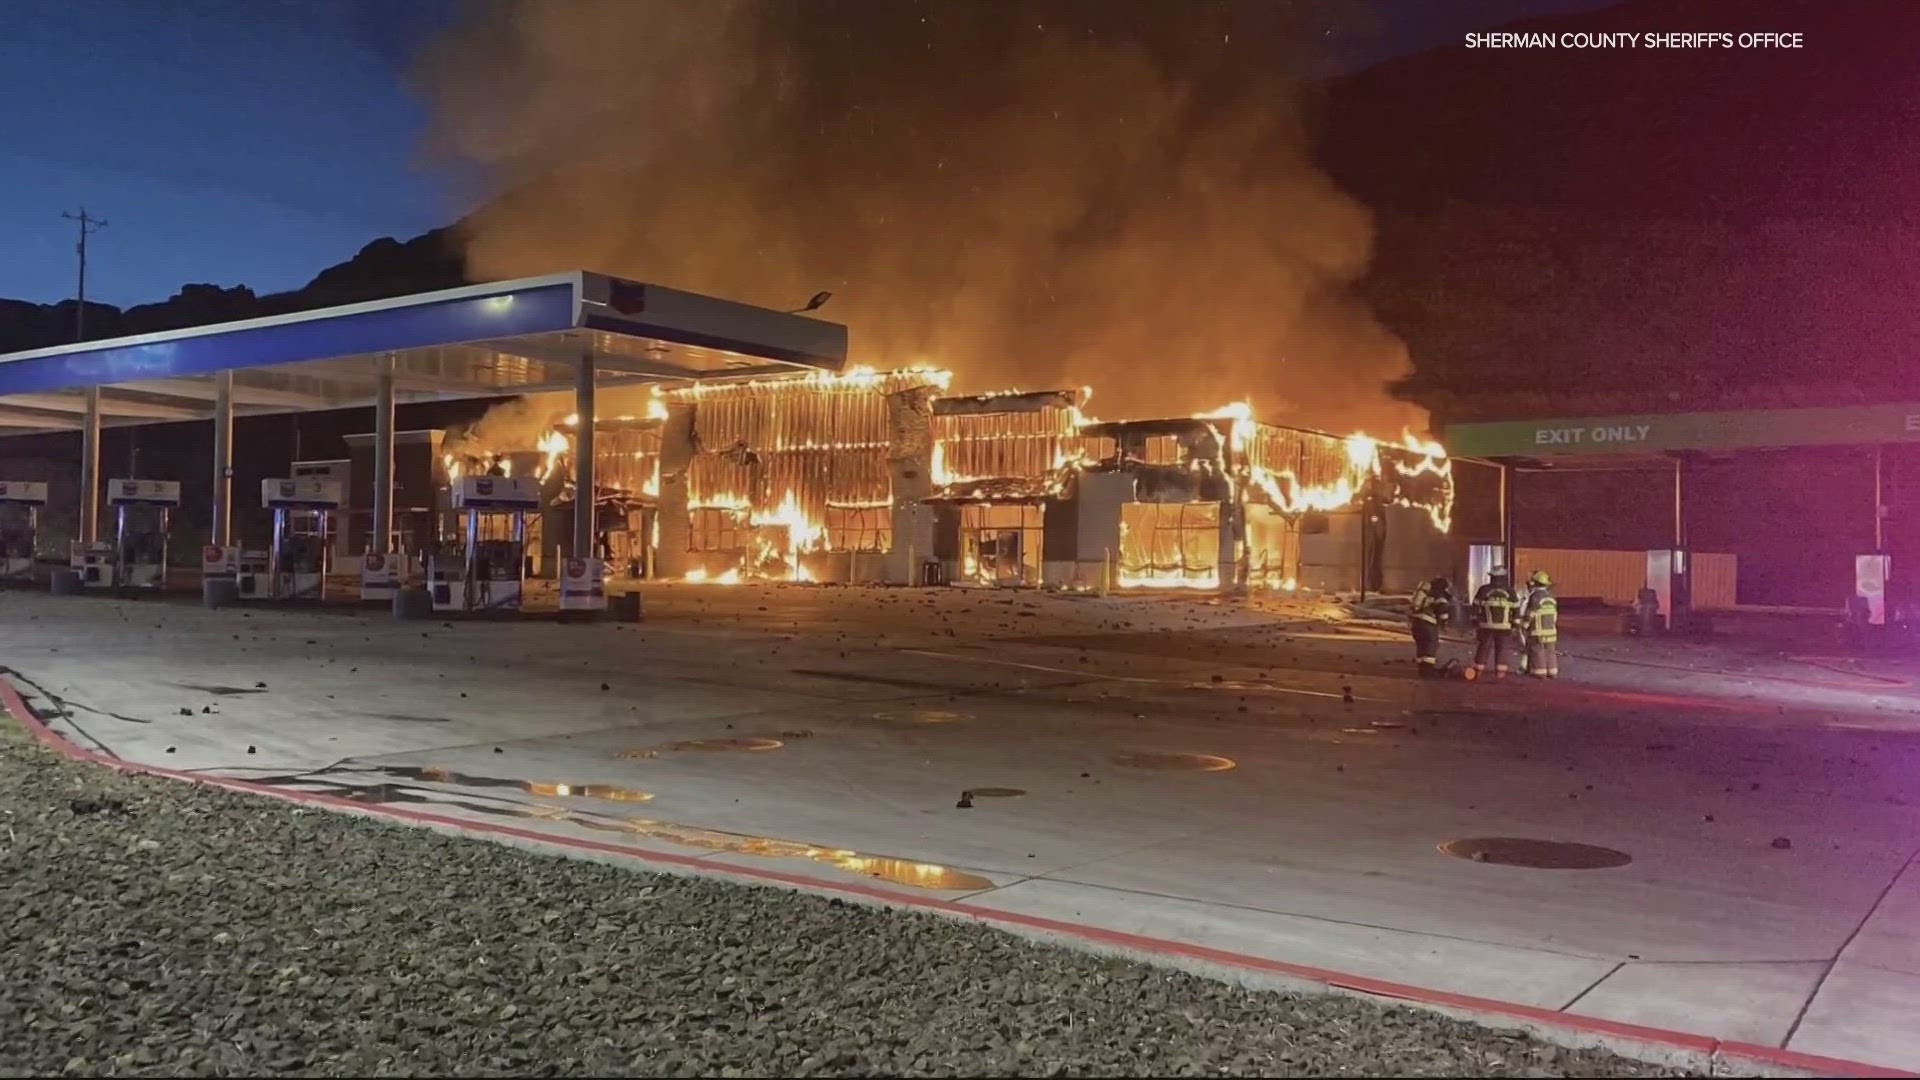 The Sherman County Sheriff's Office posted photos showing most of the truck stop's central building engulfed in flames early Tuesday morning.